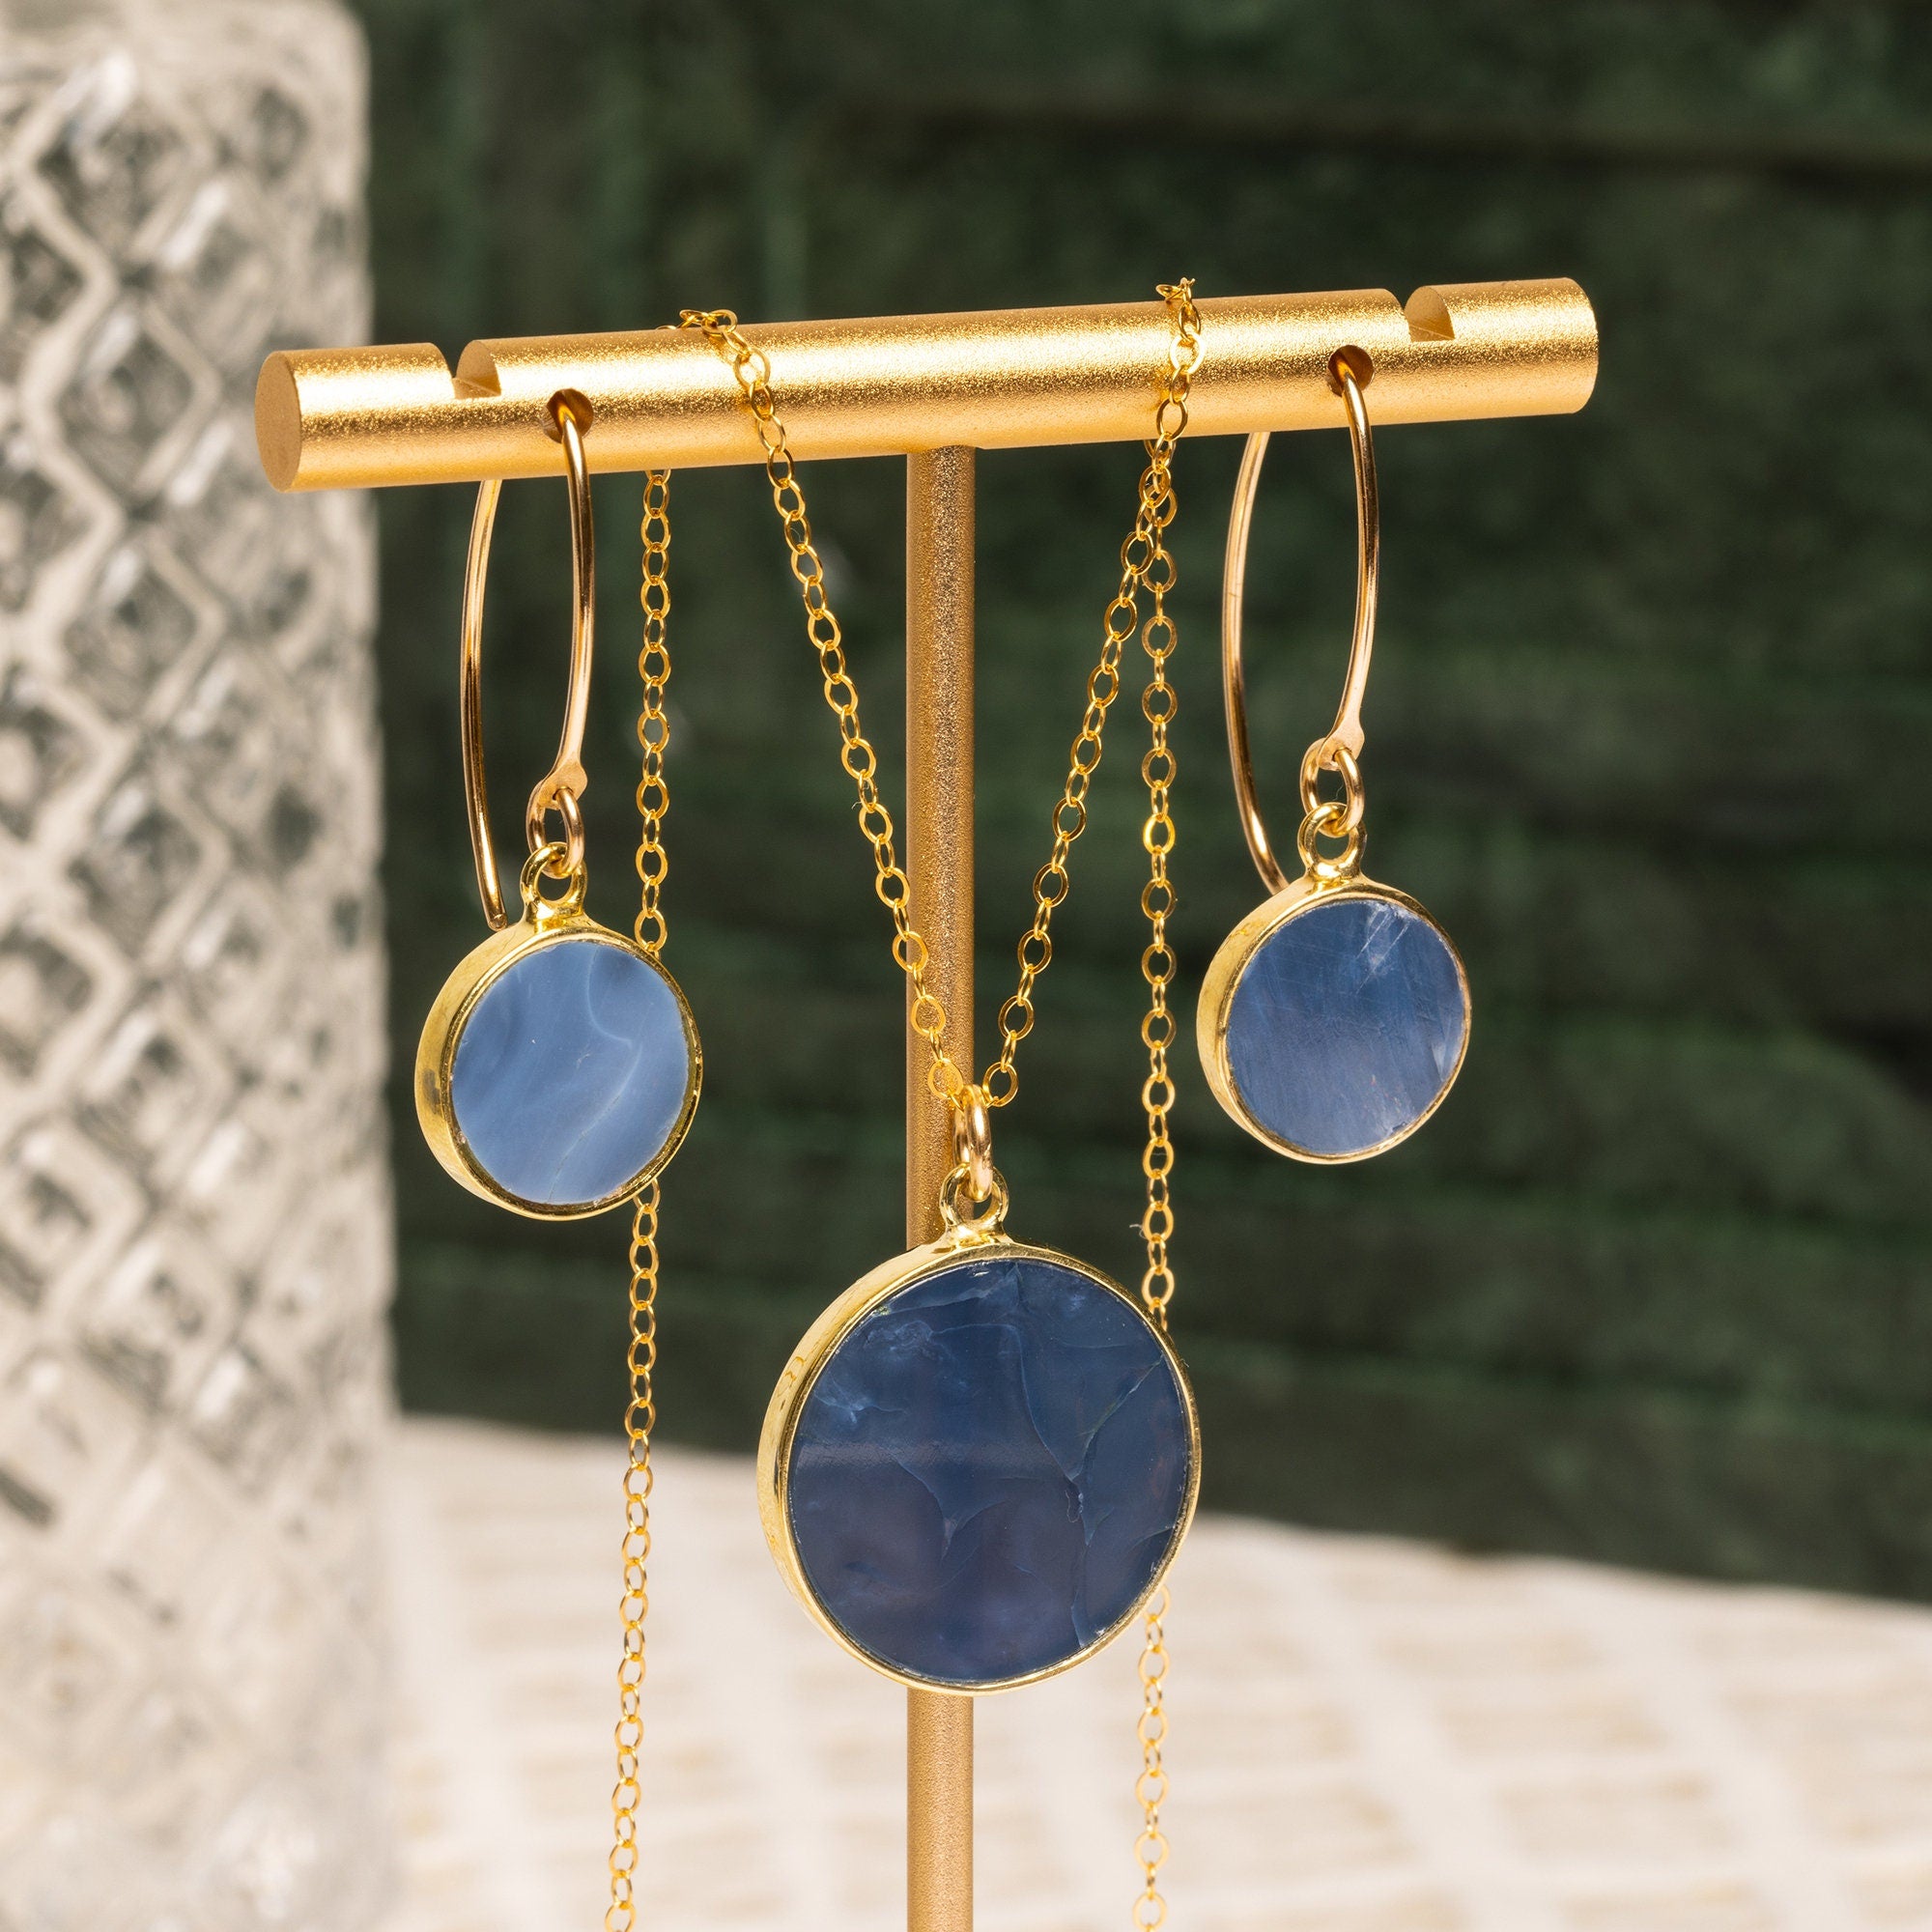 Blue Opal Gold Disc Necklace and Earrings Set Necklace and Earrings Set Soul & Little Rose   